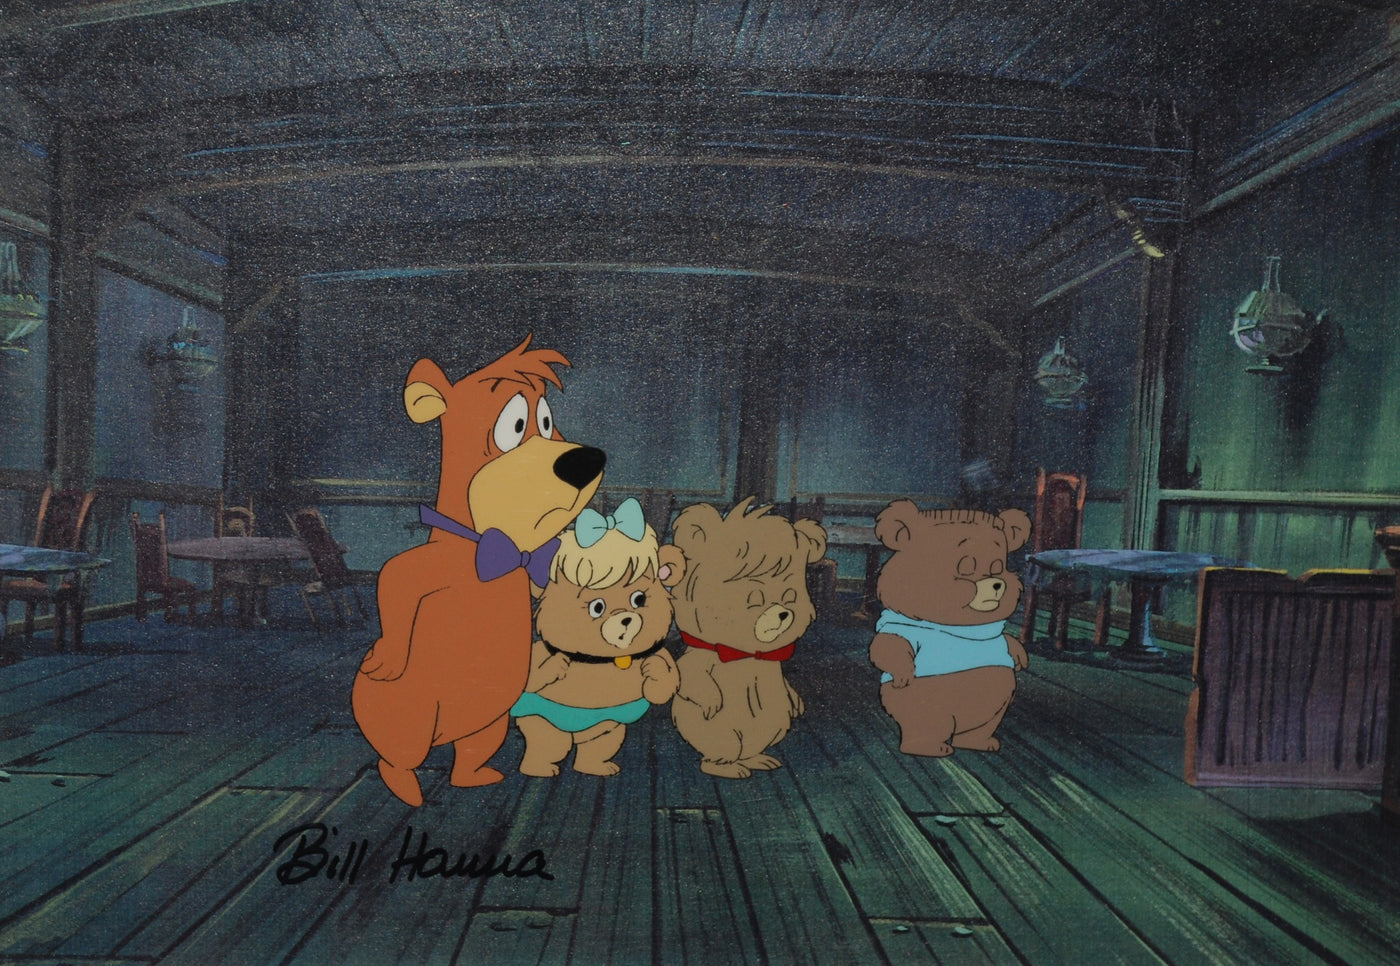 Original Hanna Barbera Production Cel Featuring Boo Boo, Signed by Bill Hanna